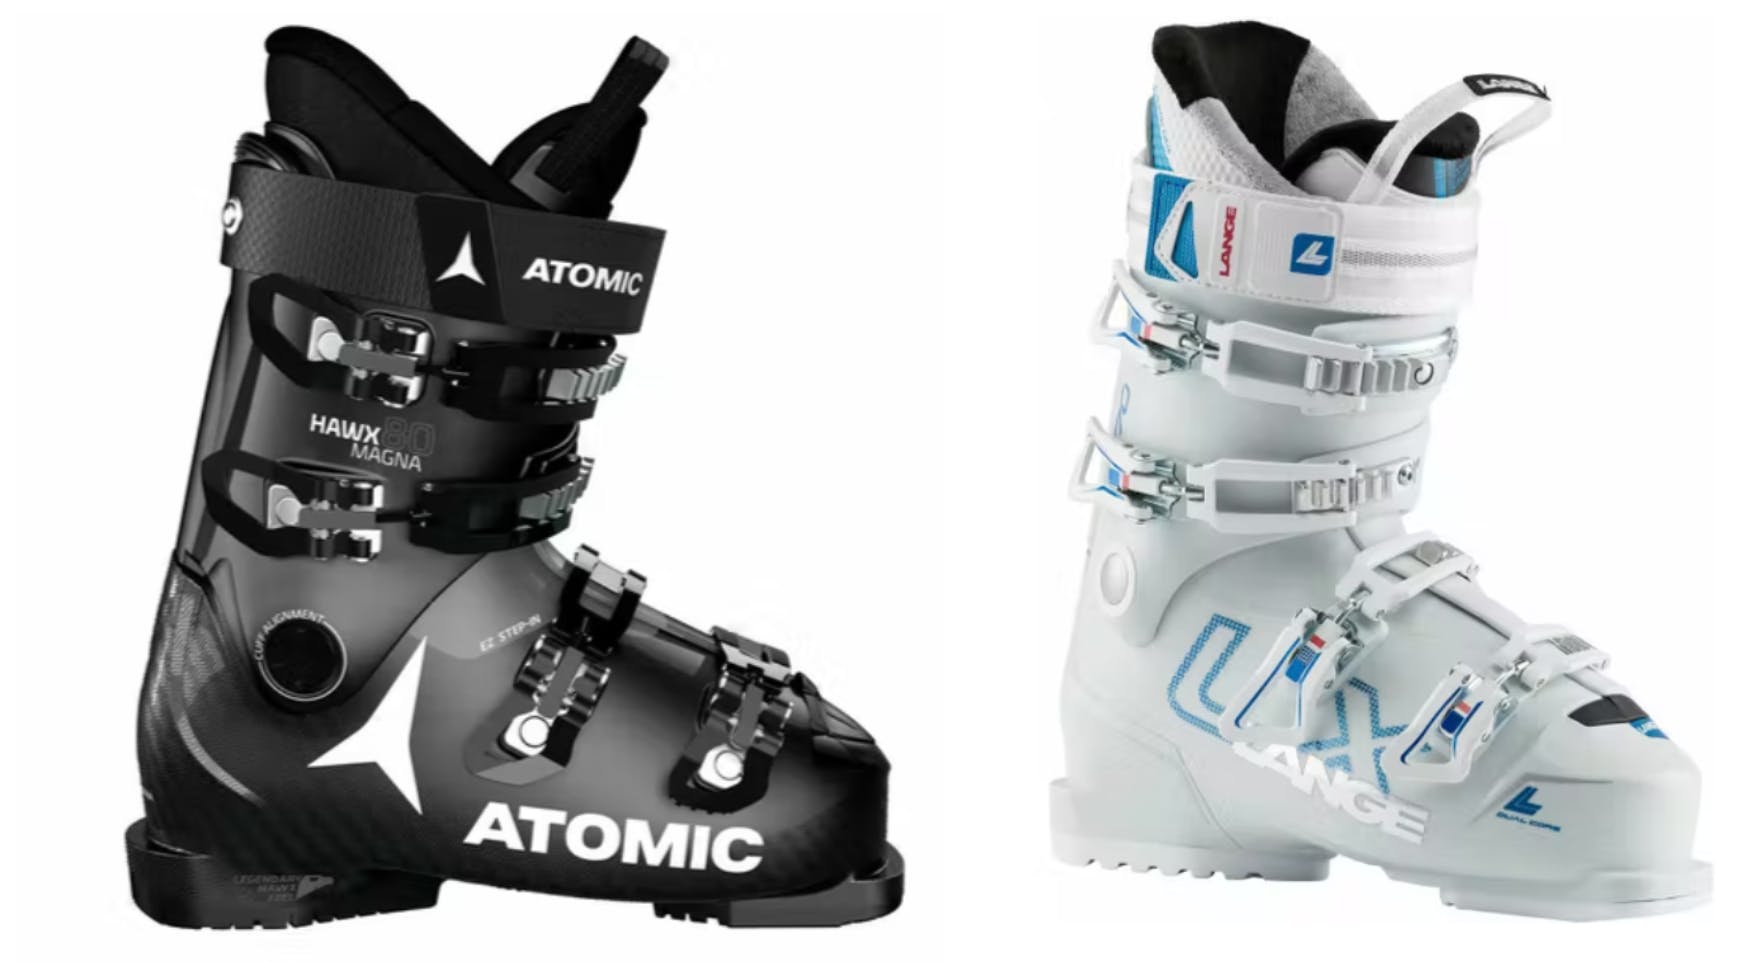 The Men's Atomic Hawx Magna 80 boot on the left and the Women's LX 70 Ski Boot on the right.